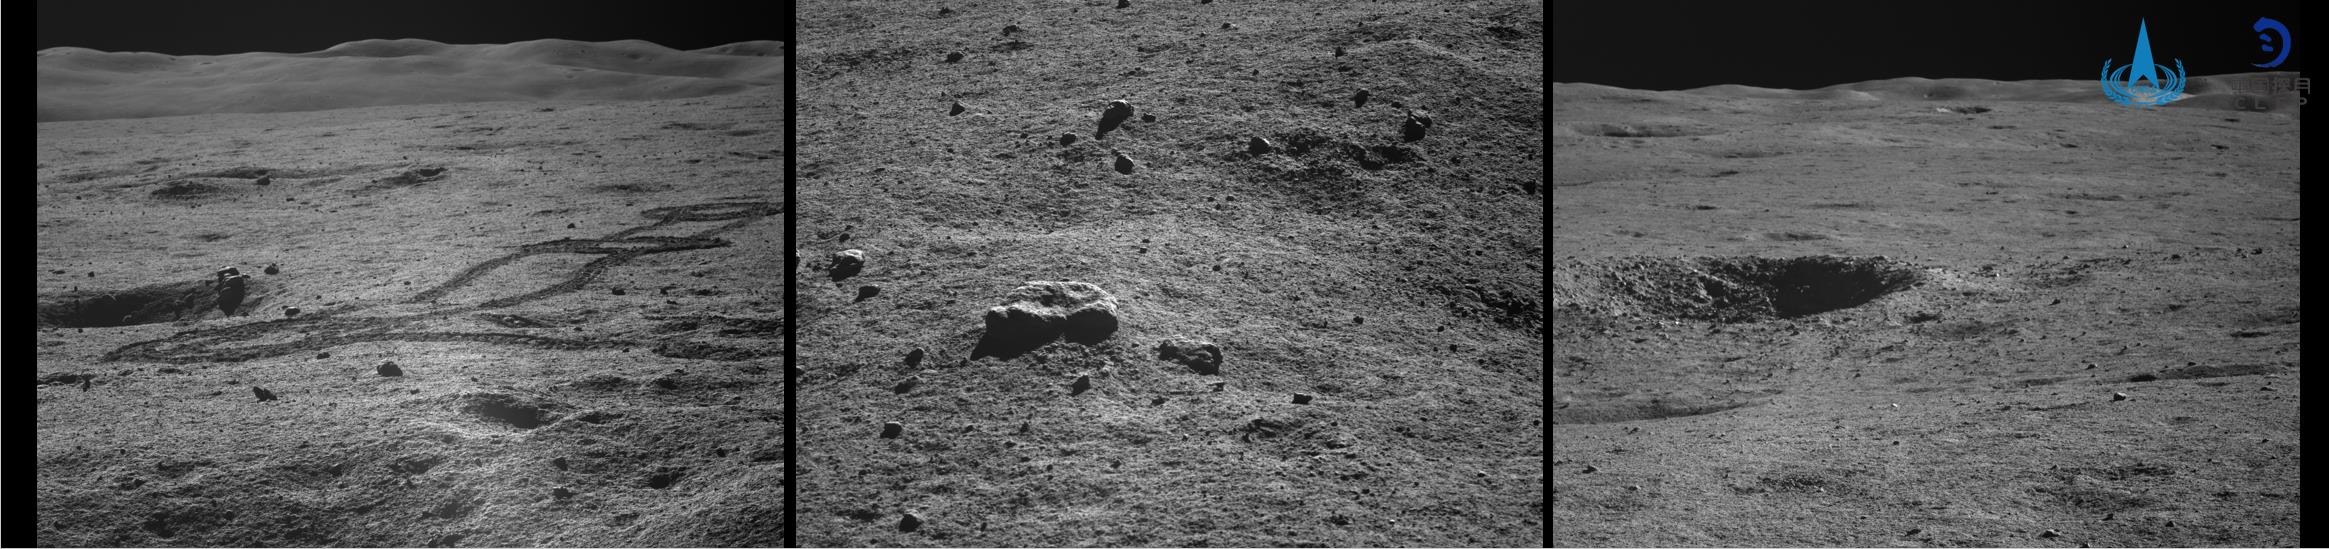 The panoramic camera installed aboard the rover took photos of the moon surface which show the wheel track left by the rover (L), a rock four meters away from the rover and an impact crater about five meters in diameter (R), January 18, 2023. /CNSA